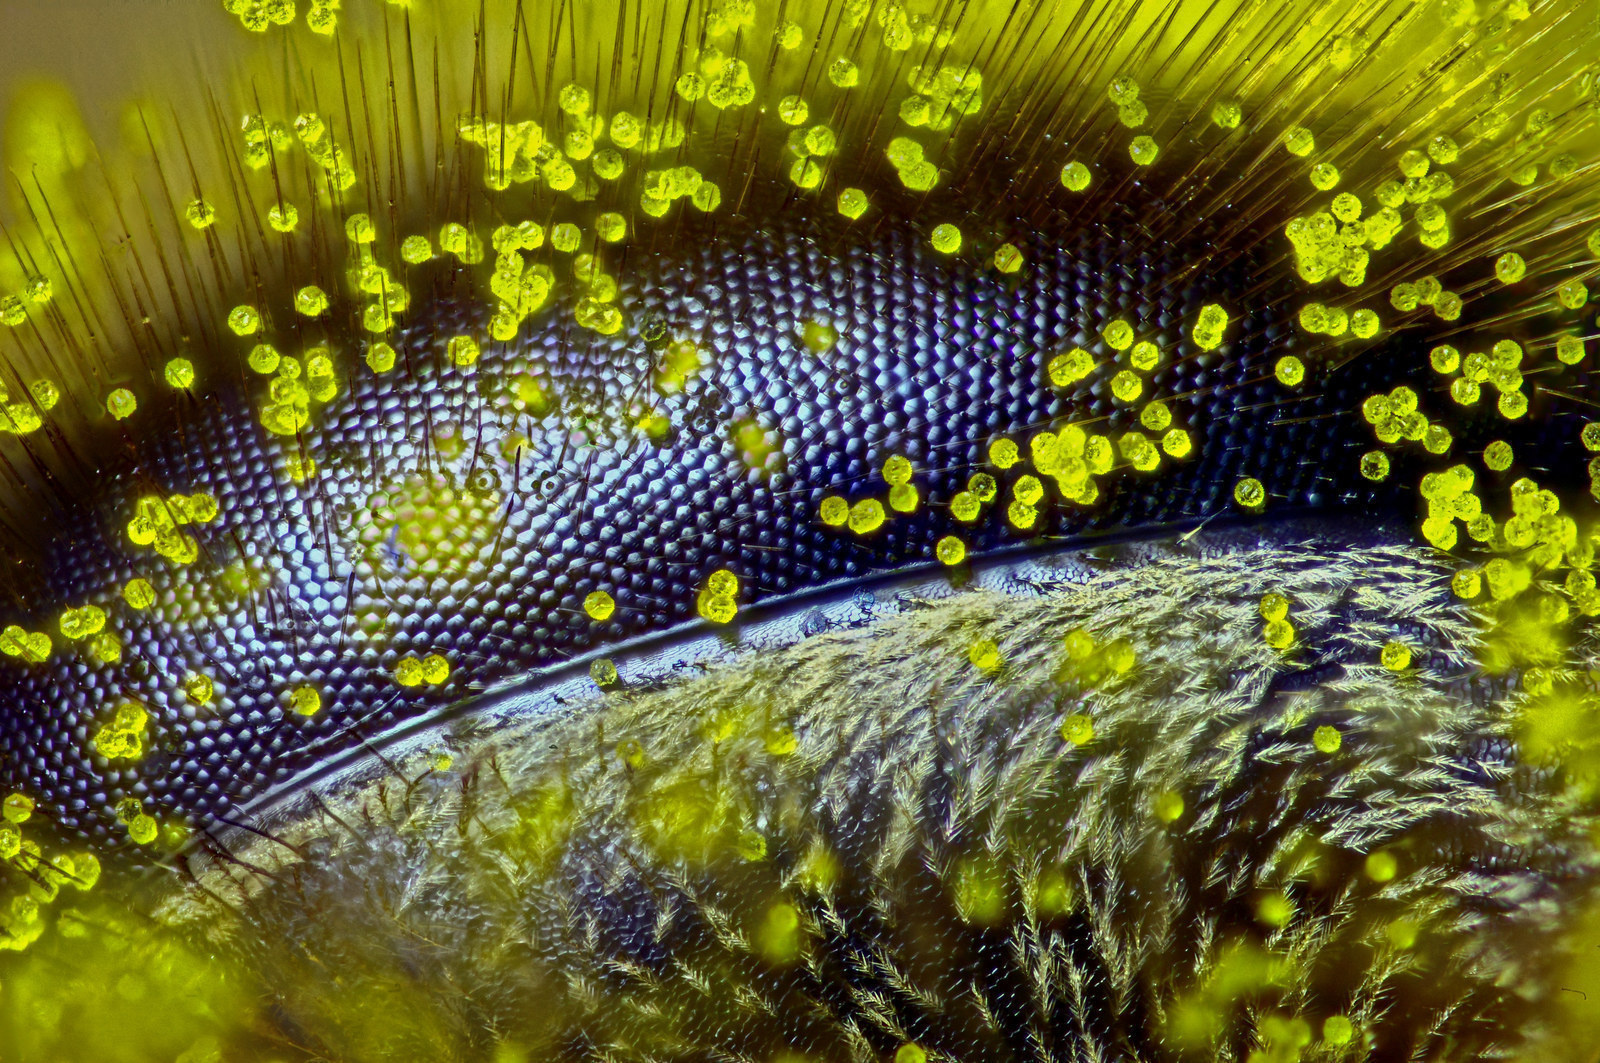 Peer into the eye of a honey bee covered in dandelion pollen at 120x magnification.